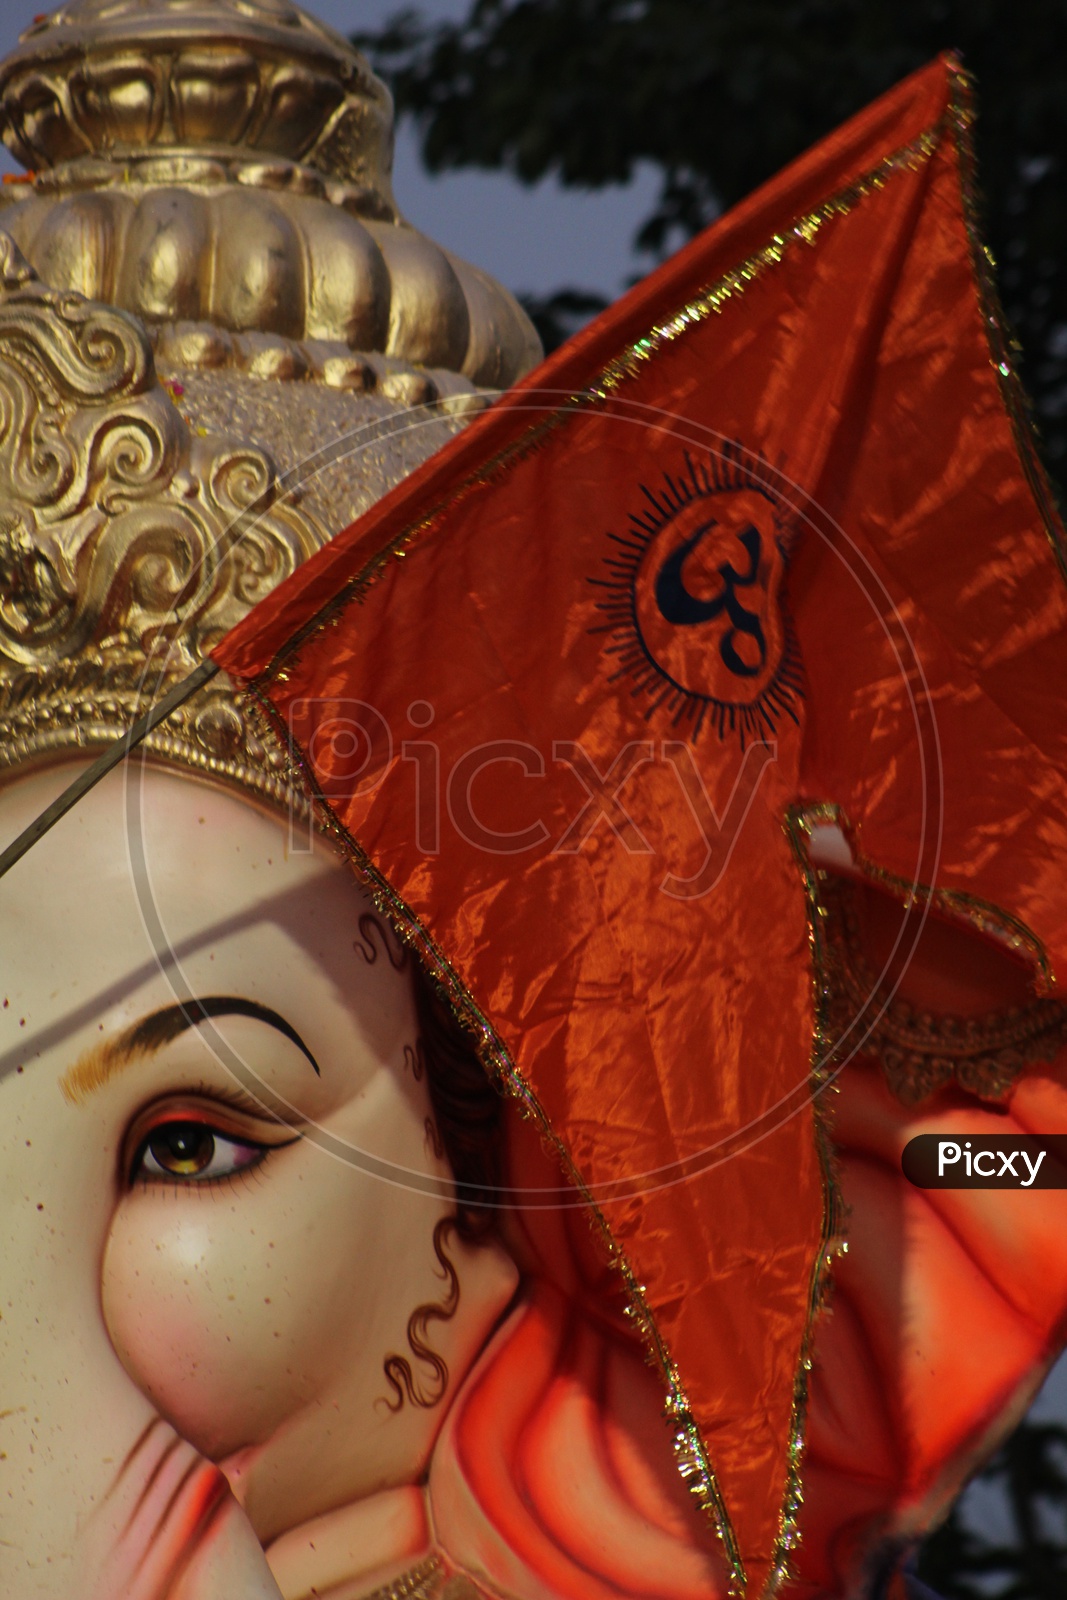 Lord ganesha with the waving flag by his devotee.